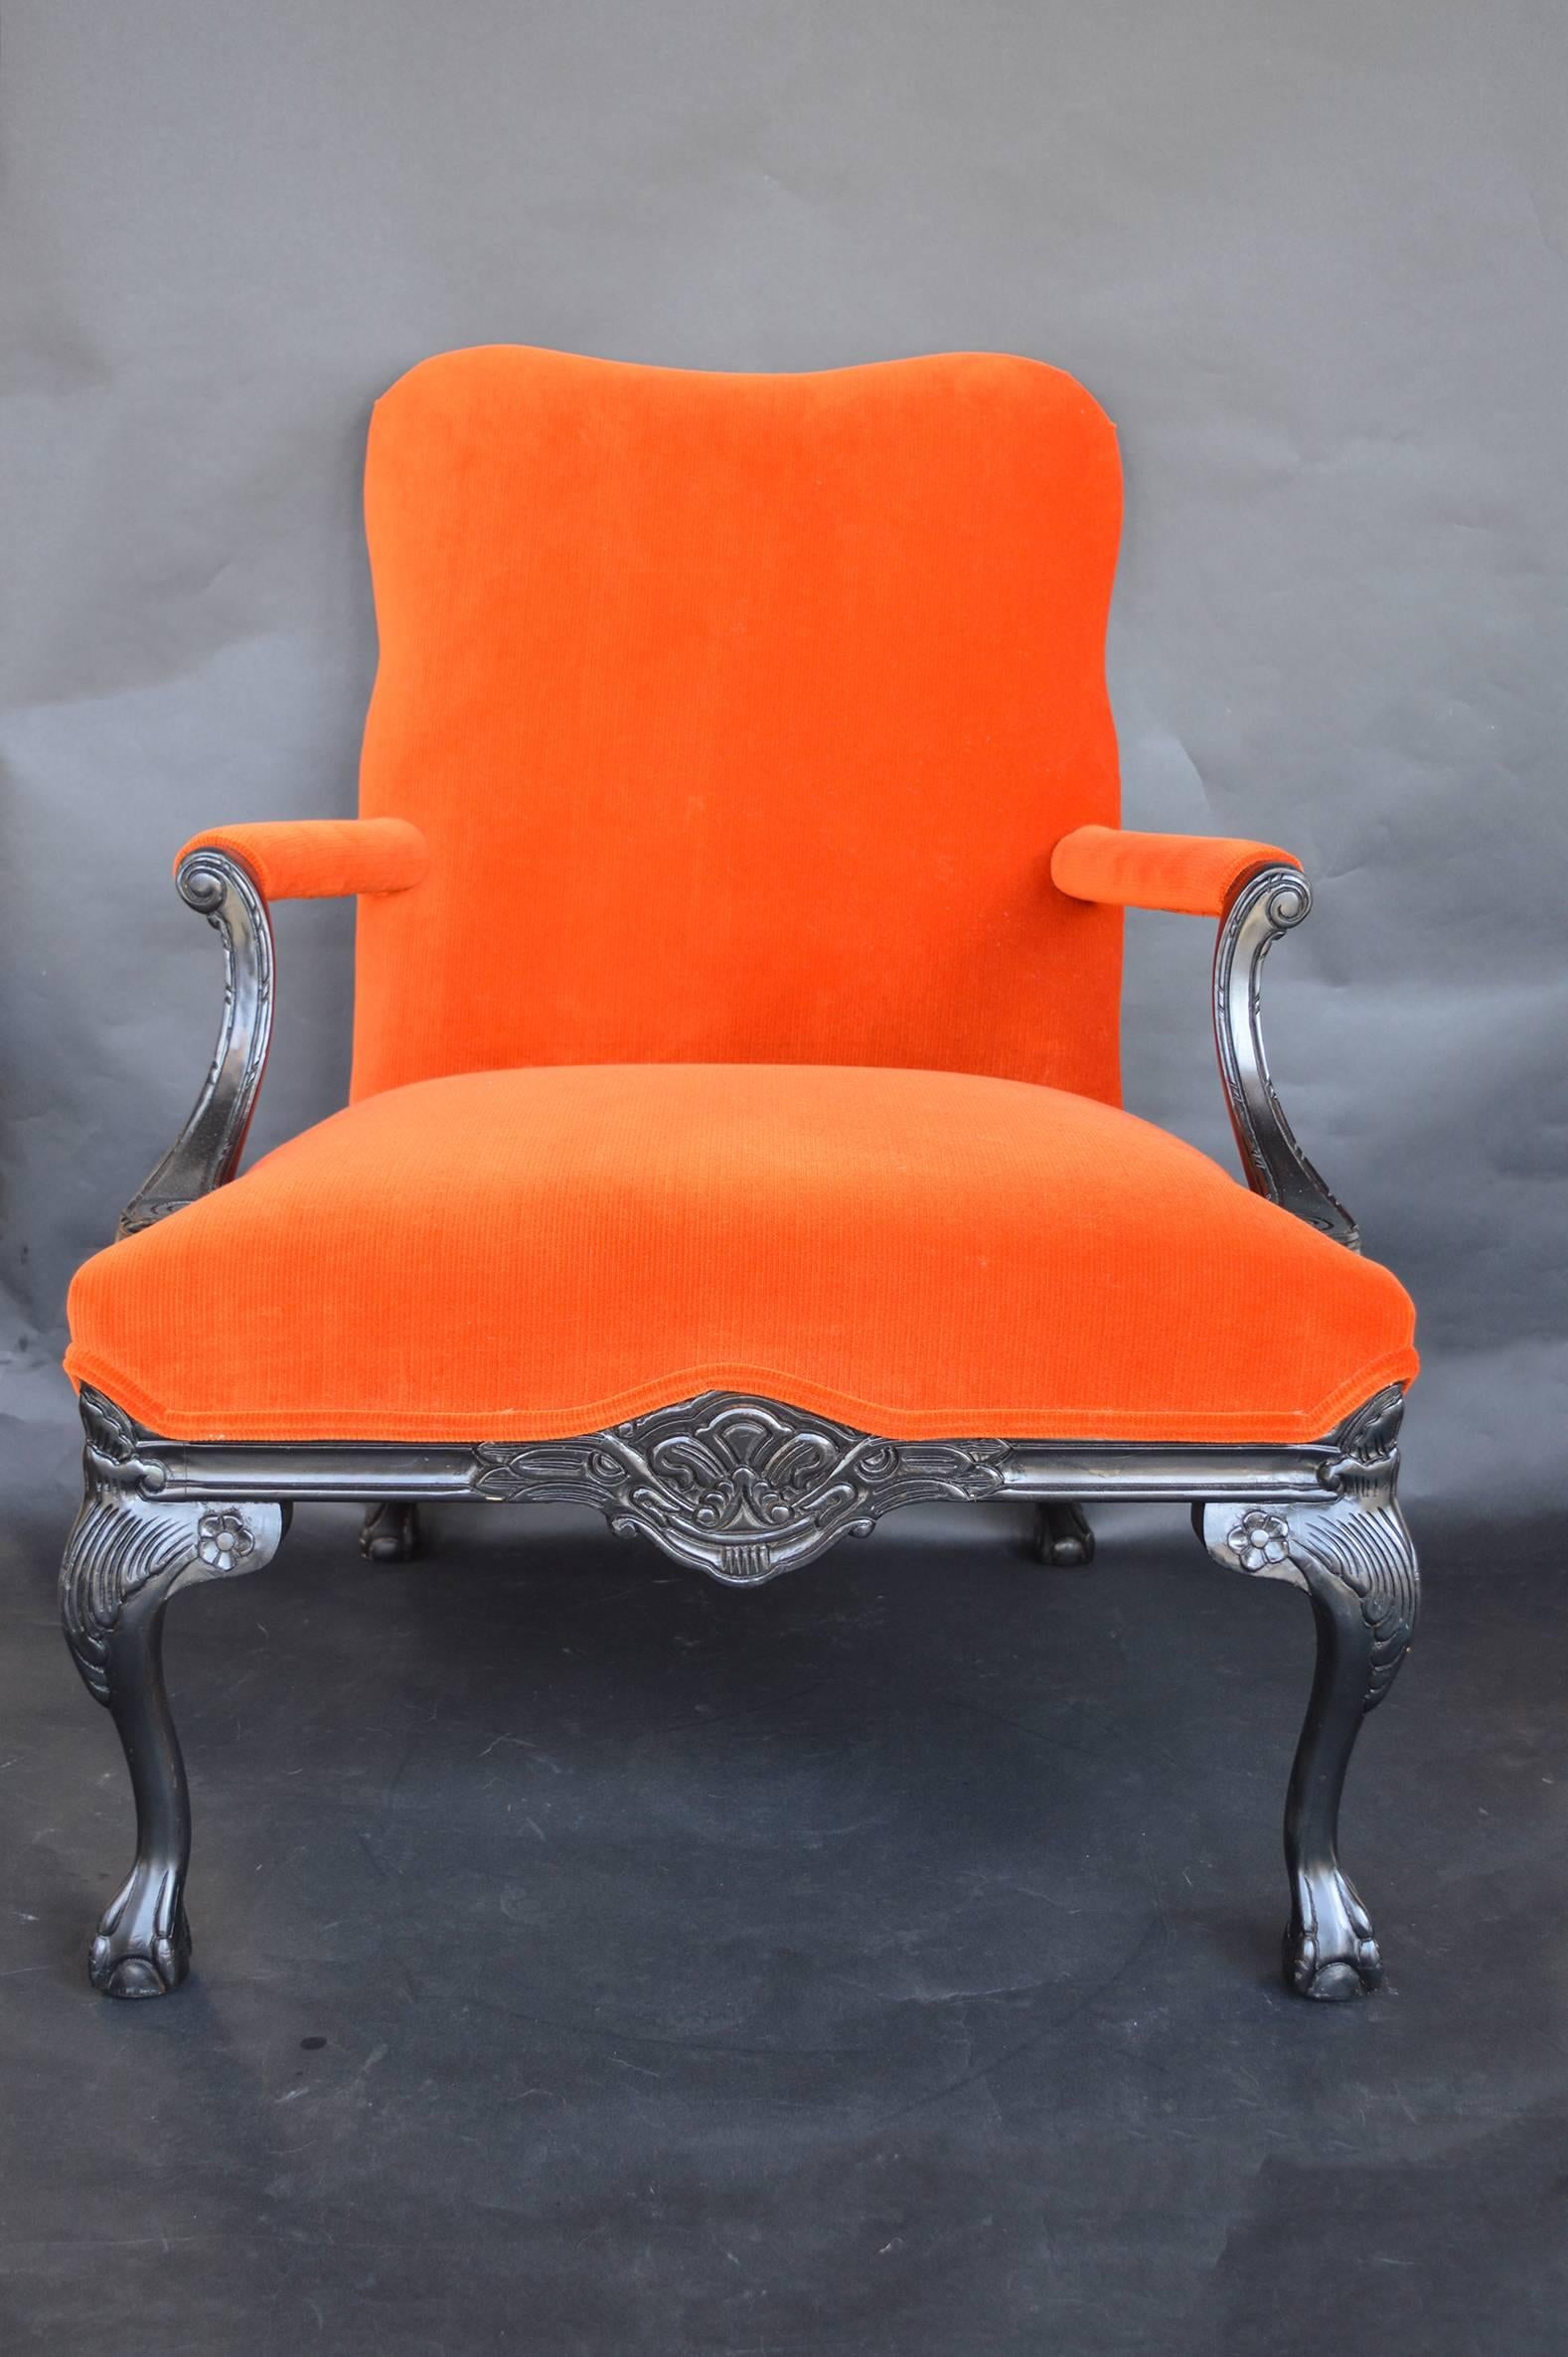 Pair of Chippendale style chairs. Upholstered in an orange corduroy. Black paint.